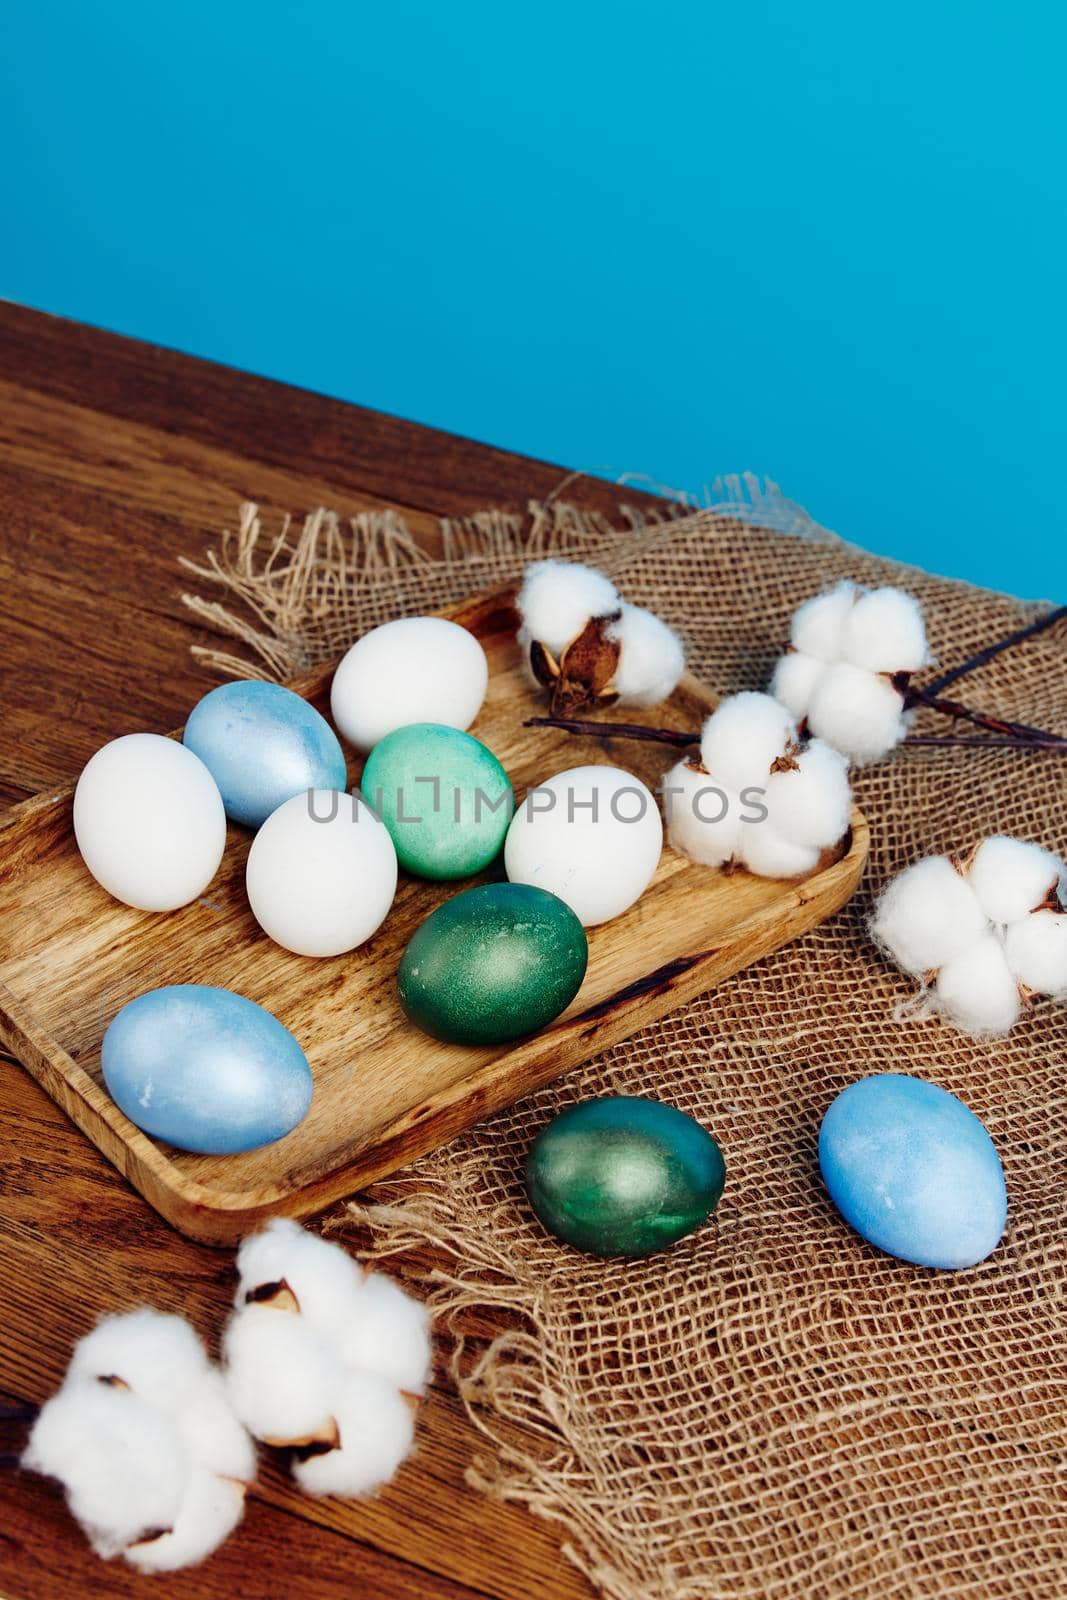 colorful eggs christian holiday easter verbena decoration. High quality photo